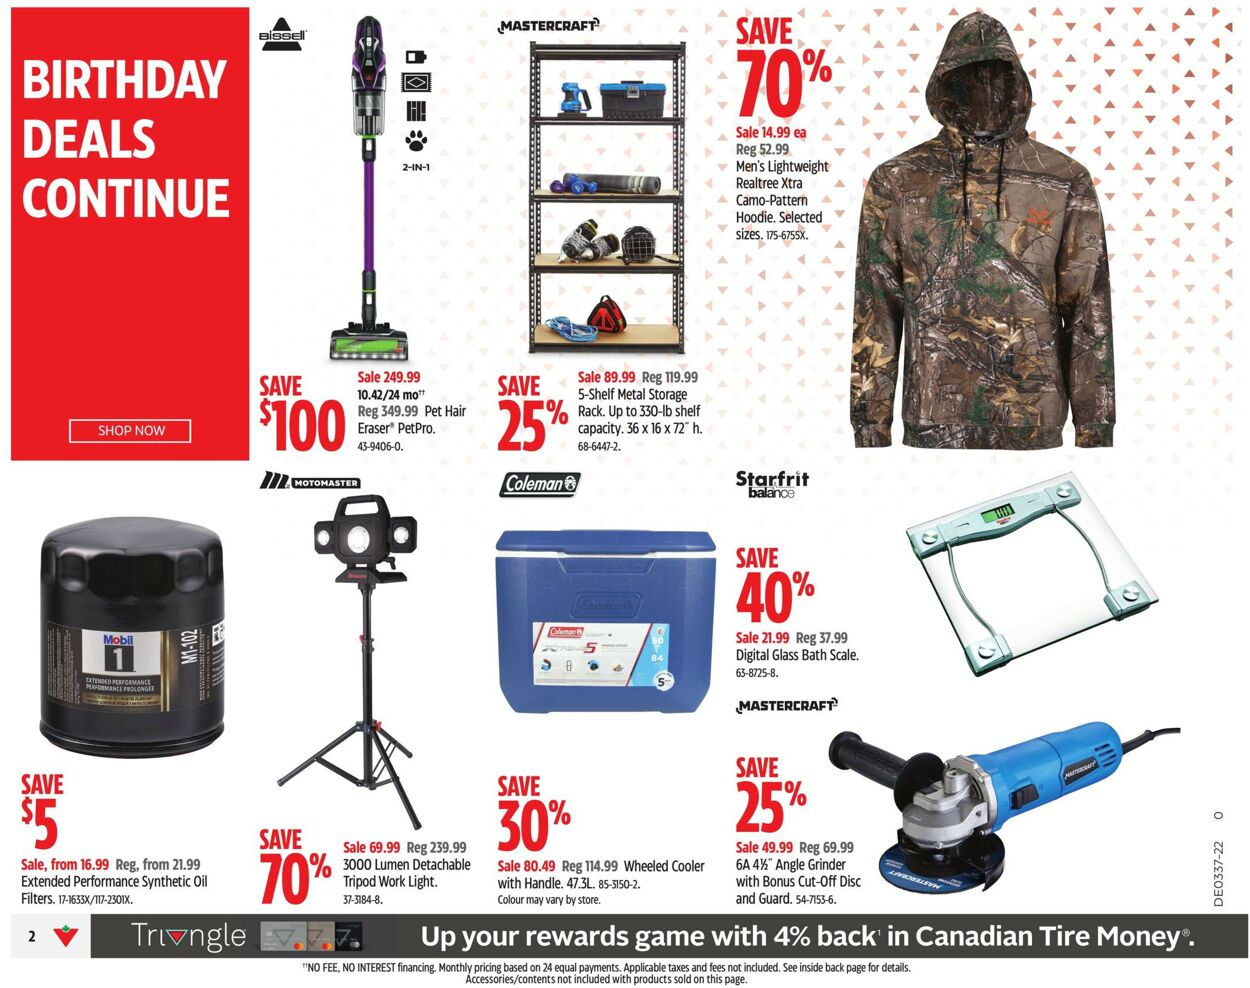 Canadian Tire Flyer - 09/08-09/15/2022 (Page 3)